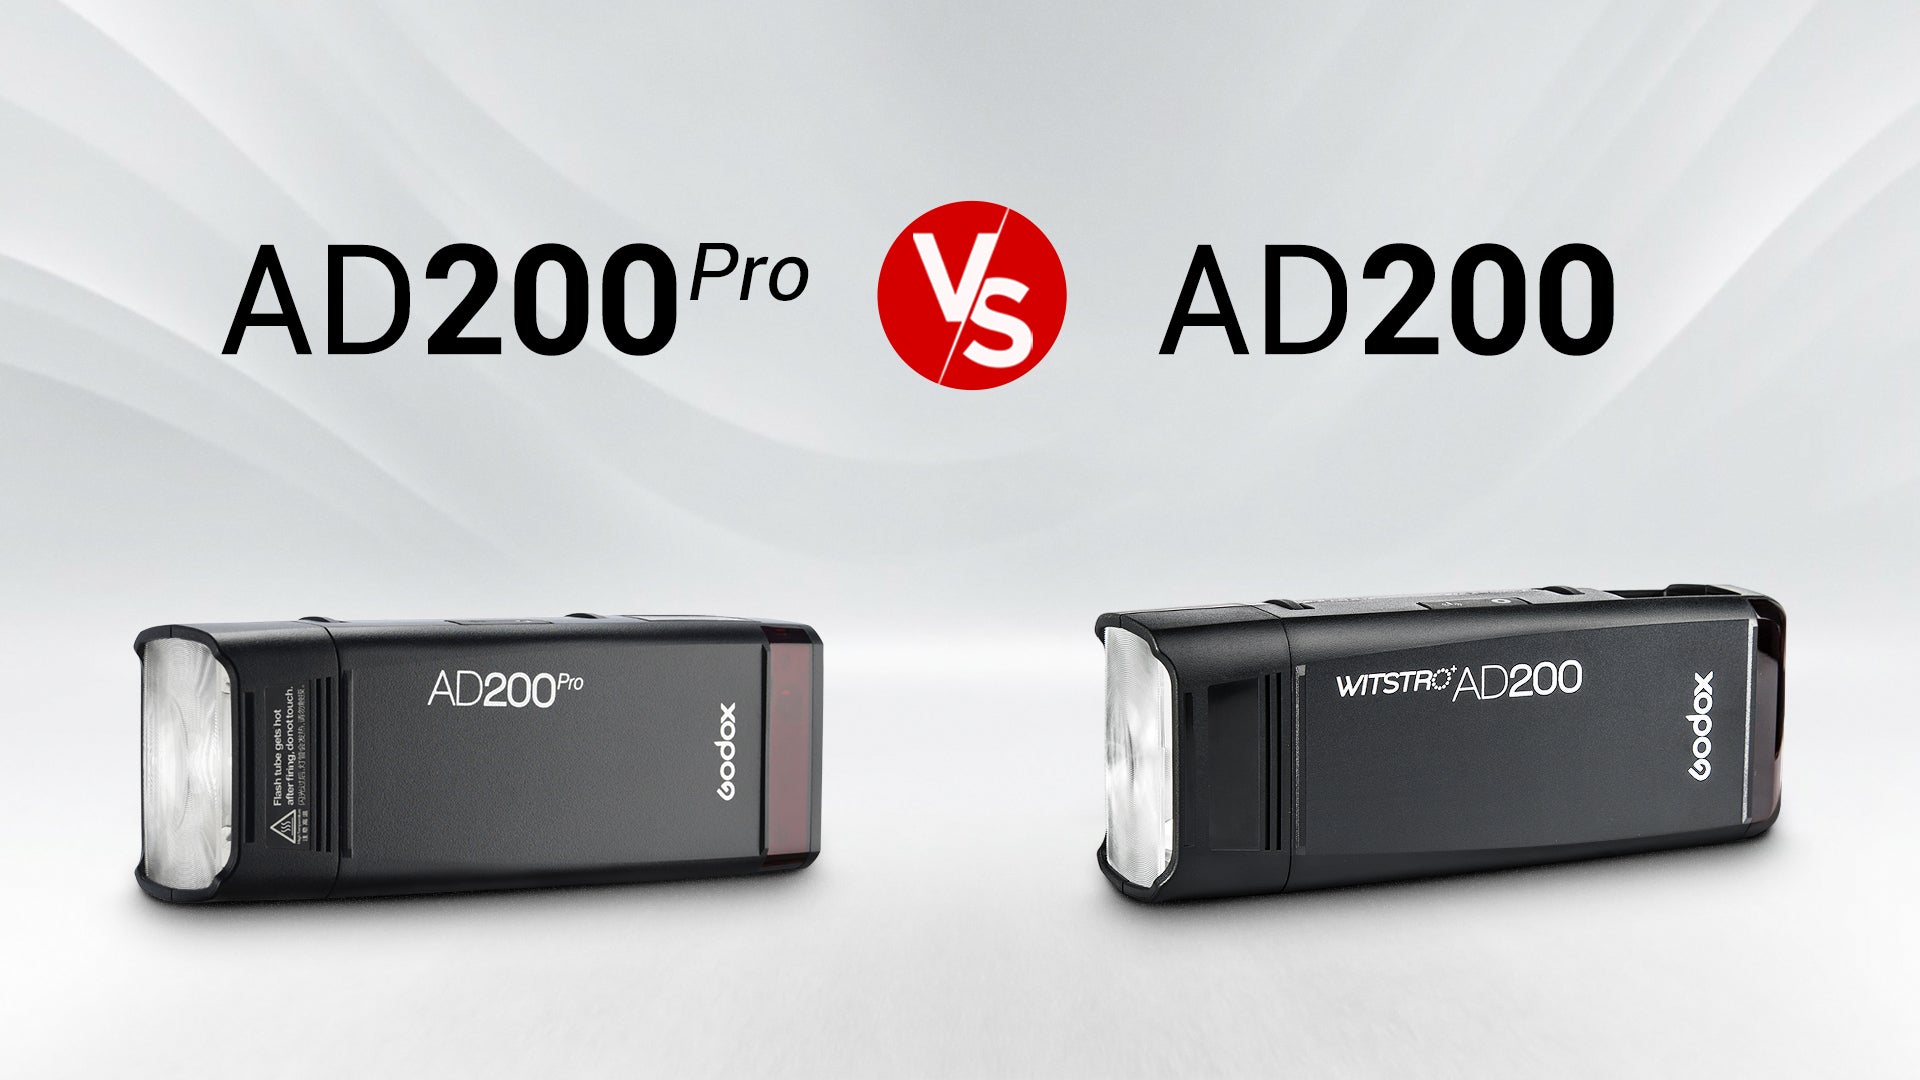 Godox AD200 pro vs Godox AD200 - Which One is the Best?